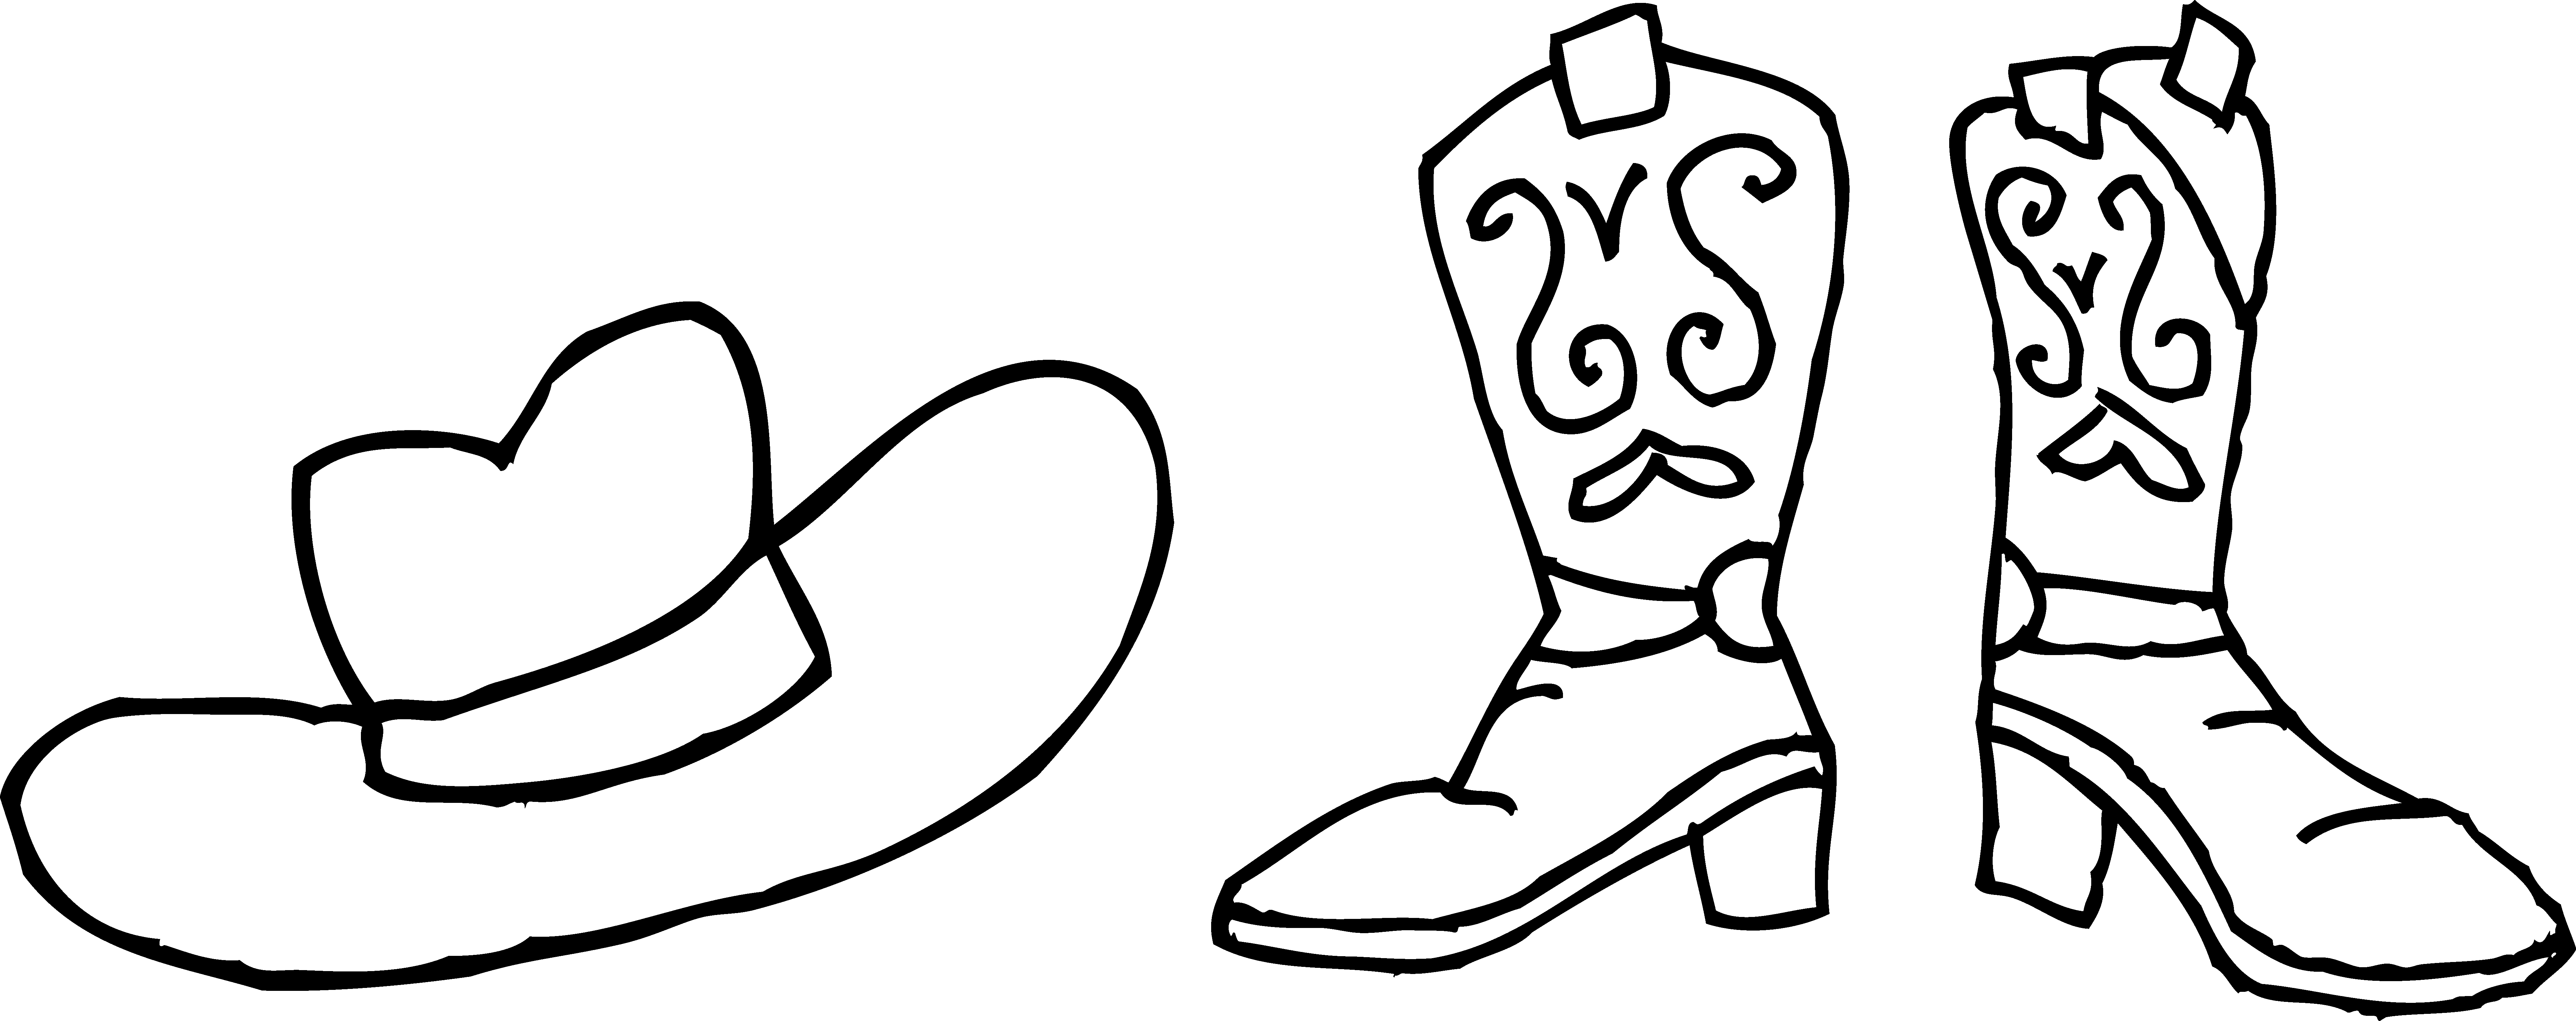 Cowboy Boot Coloring Page at GetColorings.com | Free printable